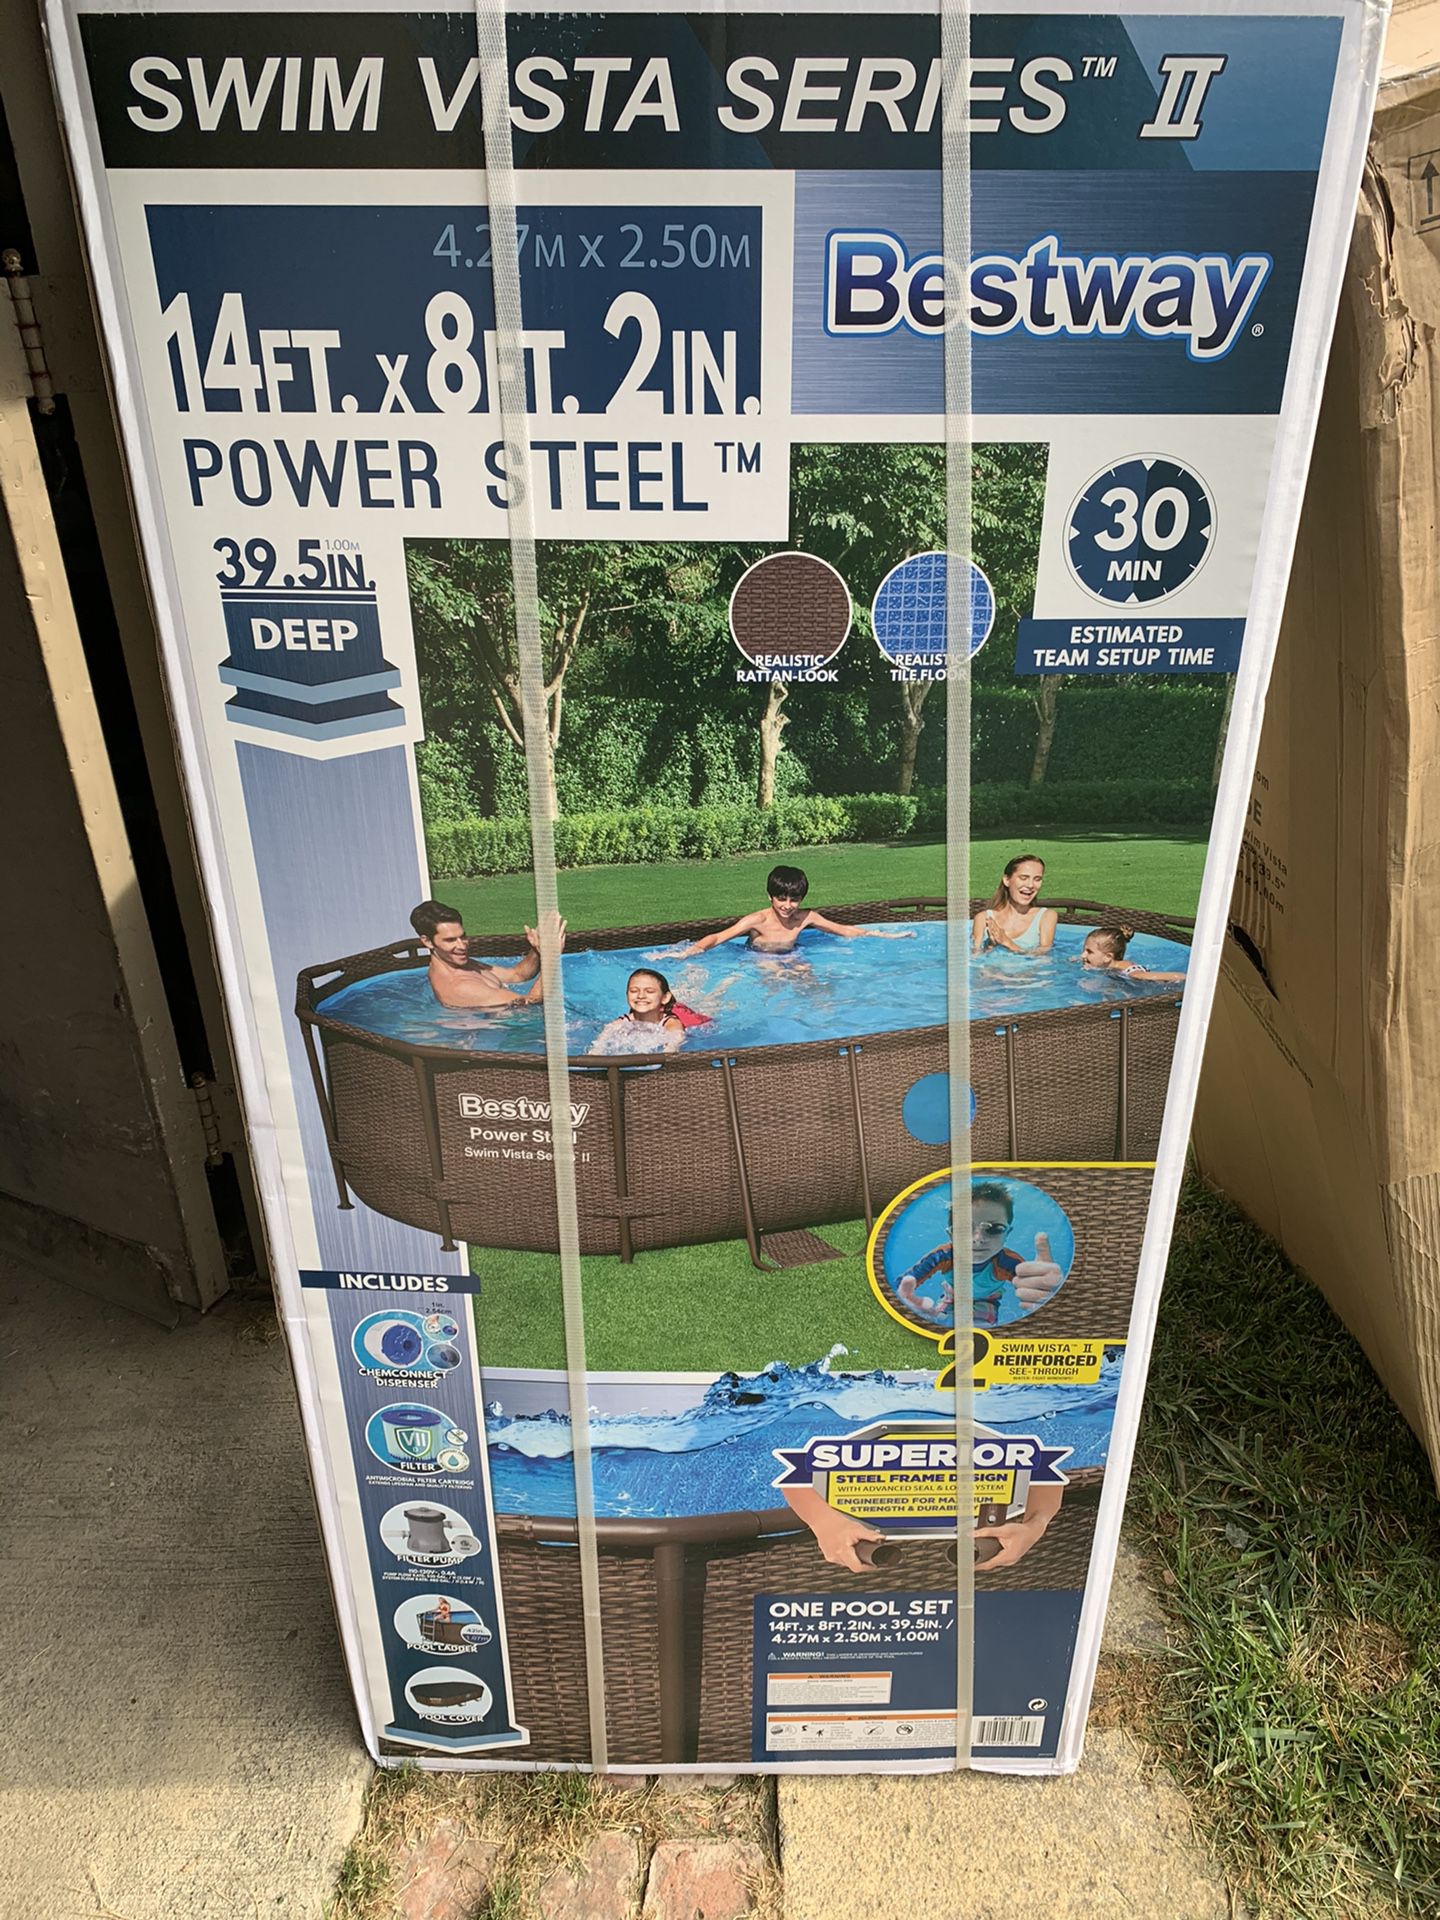 NEW Bestway 14’ x 8’ x 40” Power Steel Frame Swimming Pool Set (Includes Filter)